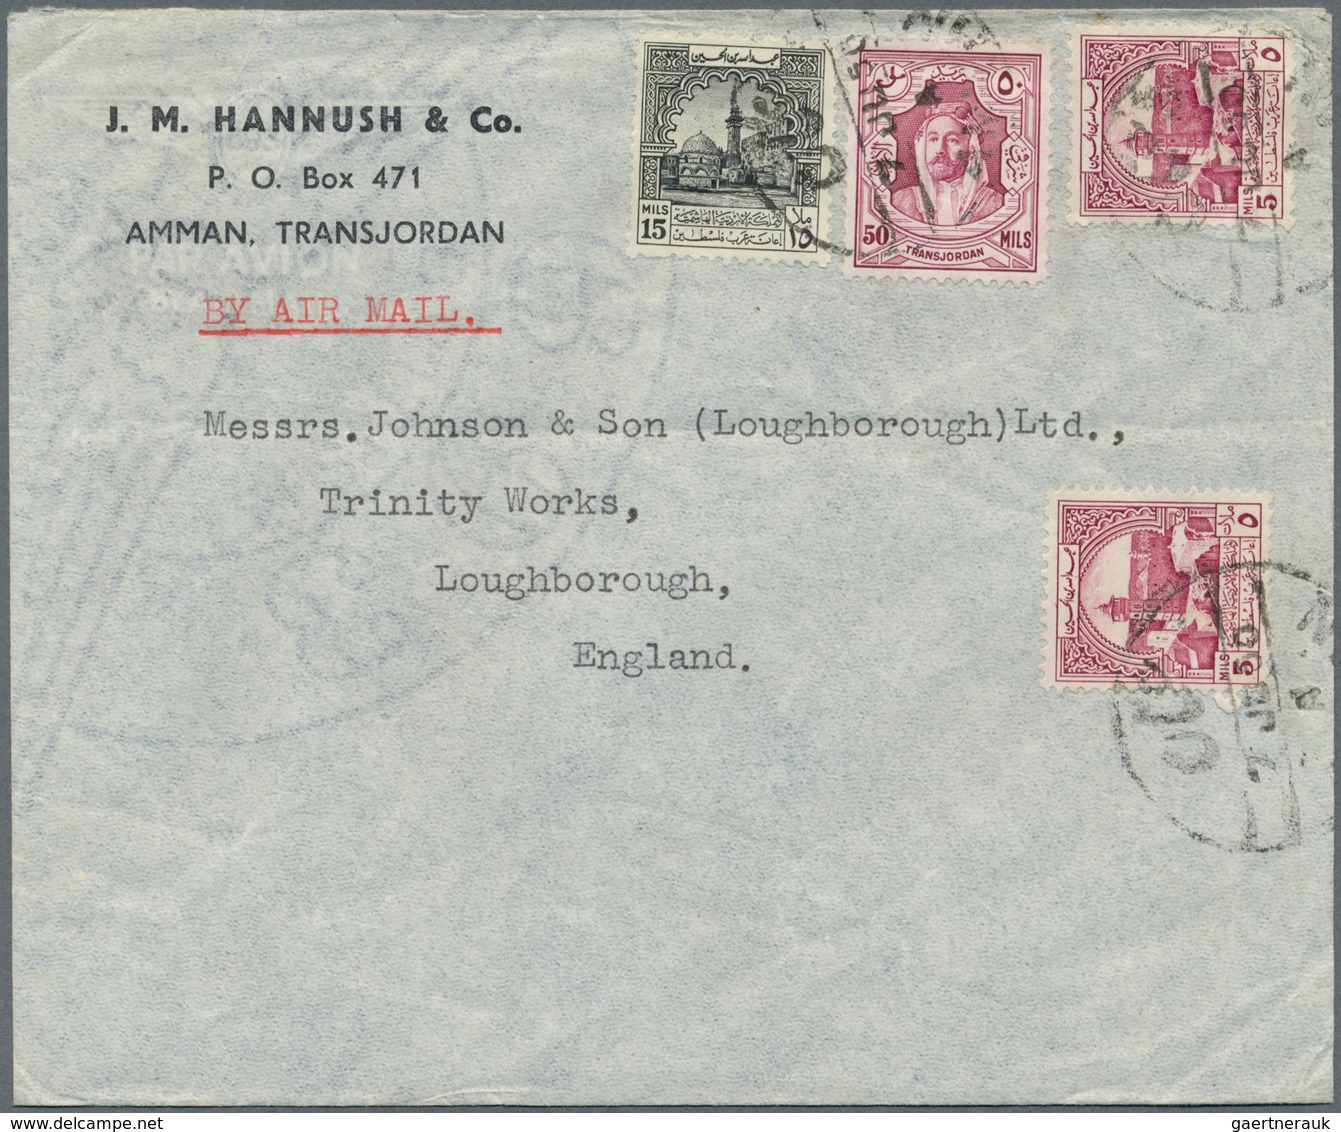 23294 Jordanien: 1948 - 1979, 37 covers, nice collection of covers and some postal stationery, good franki